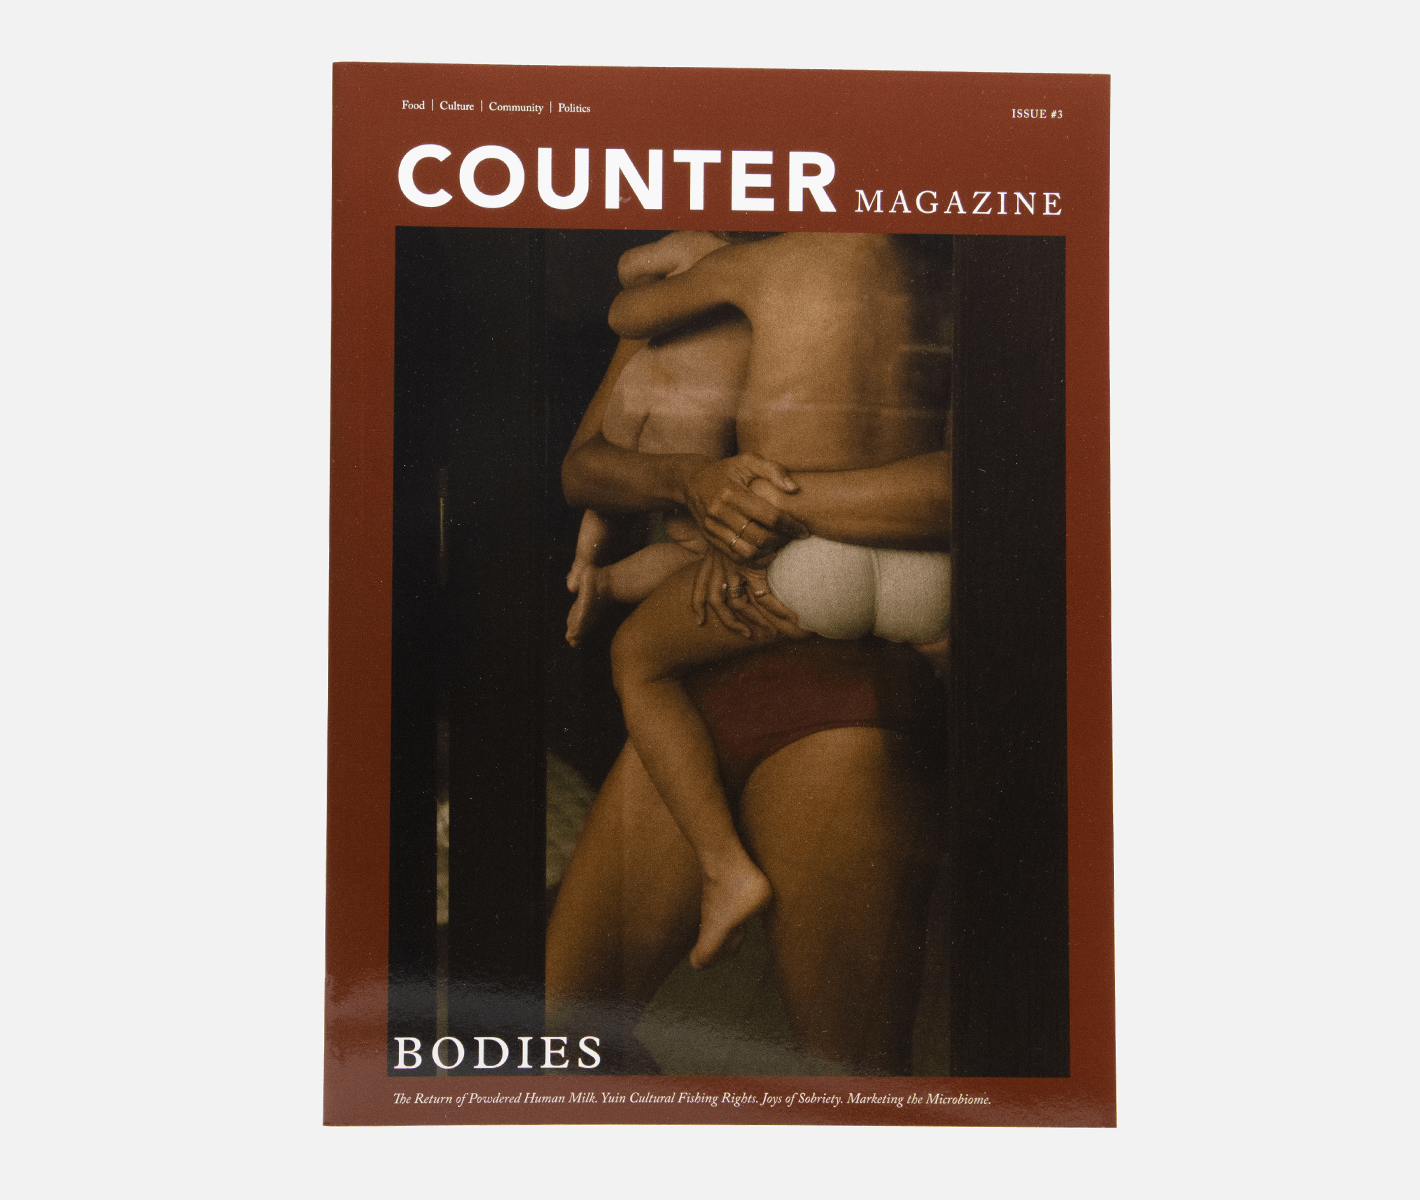 Counter Magazine Issue #3 Bodies - DRNKS